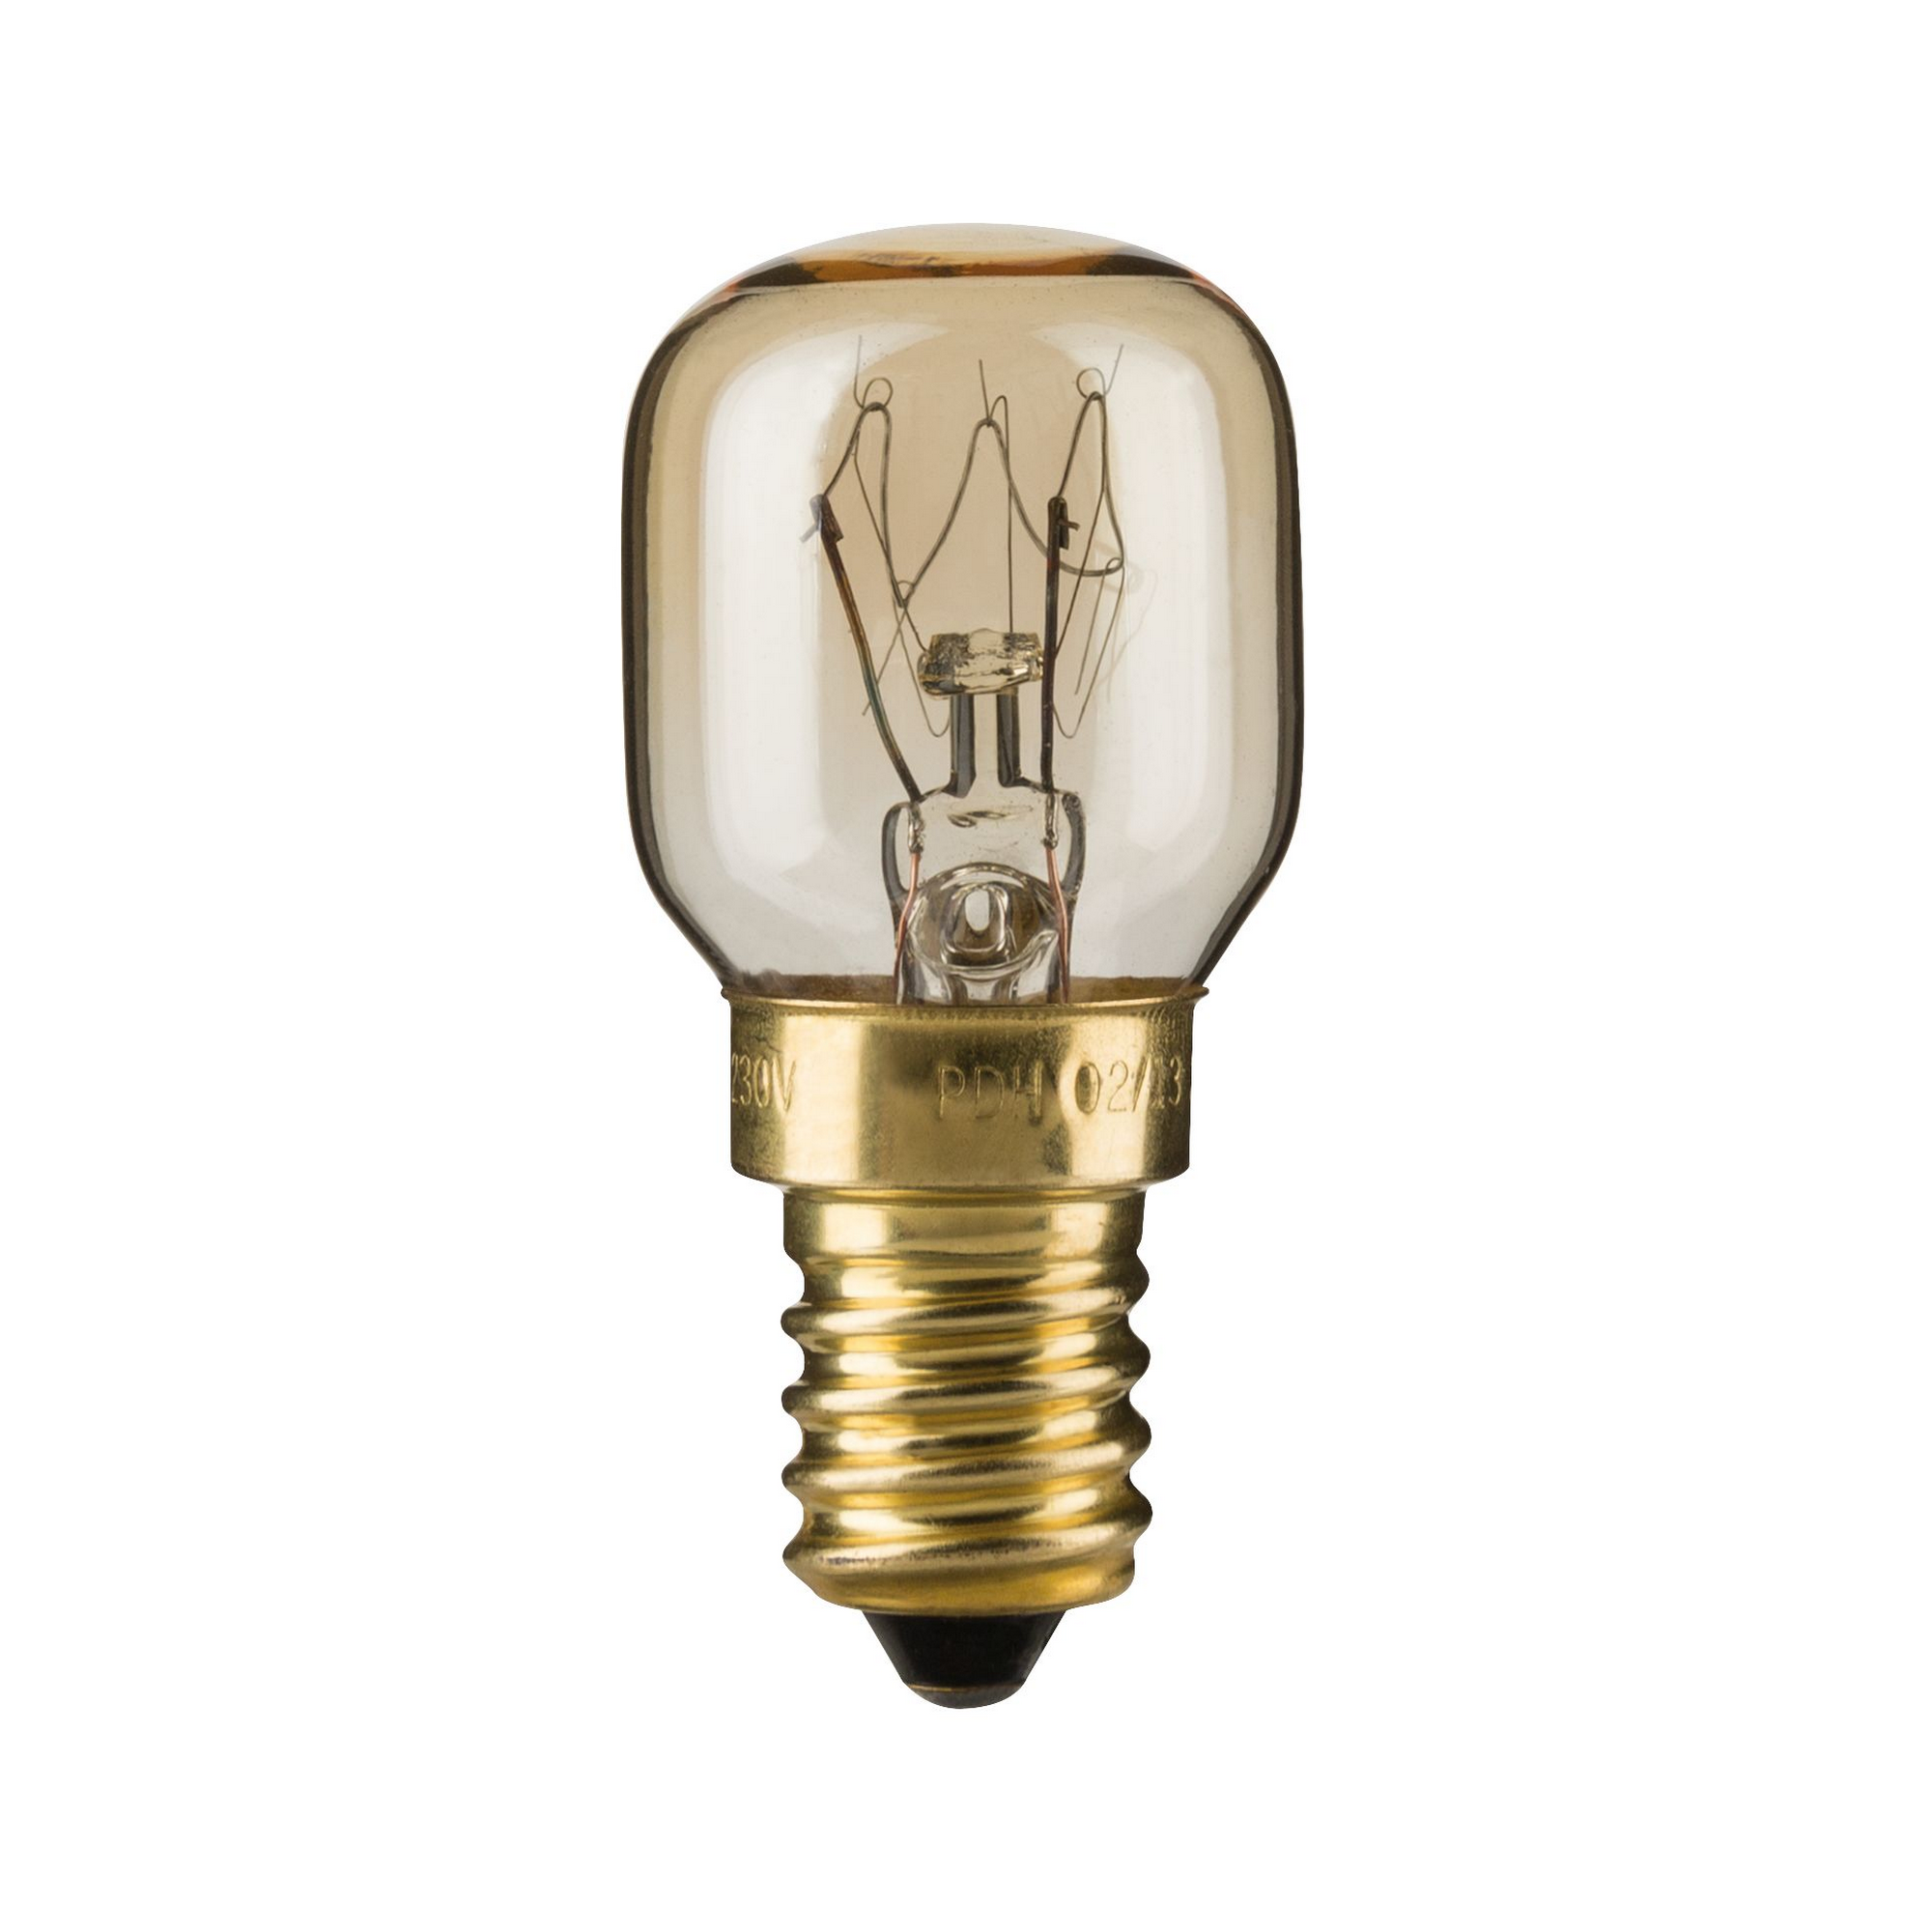 Backofenlampe E14 25 W 125 lm + product picture